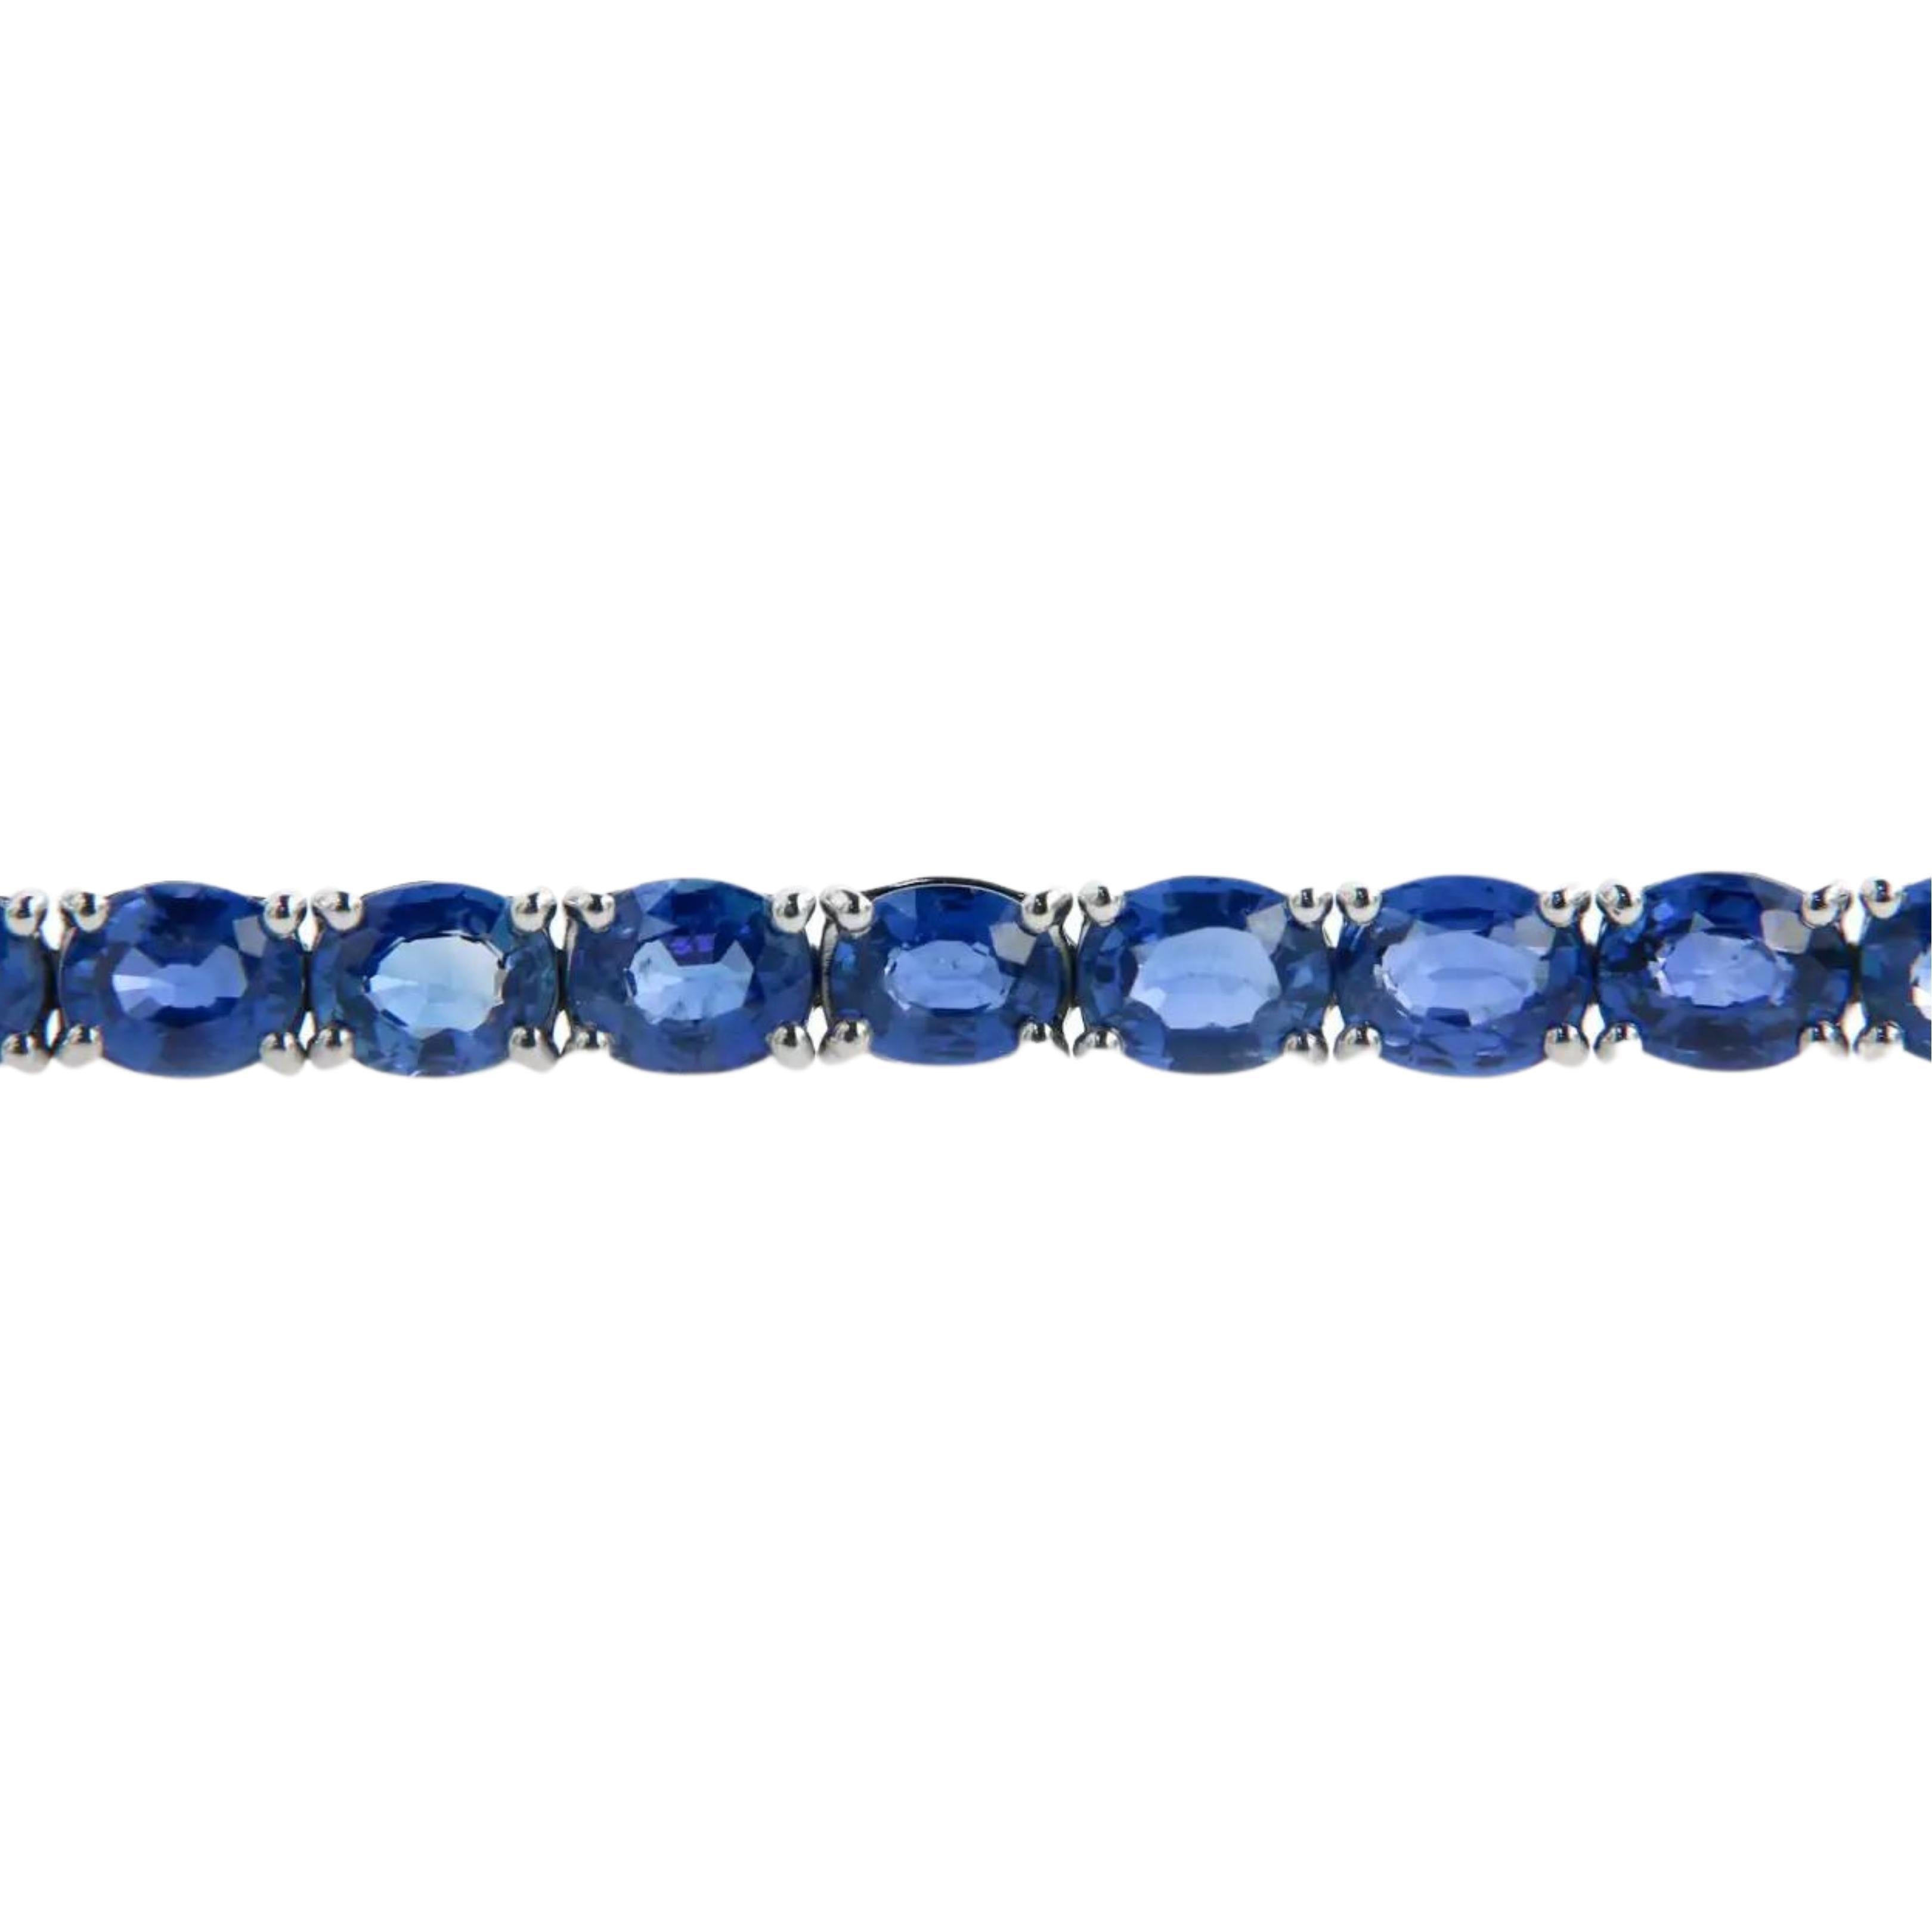 15.58 carats of oval shaped natural blue sapphires make this tennis bracelet. The oval sapphire sizes are 5x4mm using 35 pieces to make this 7inch tennis bracelet. Set in 18k white gold this link bracelet was produced for movement.

 They are